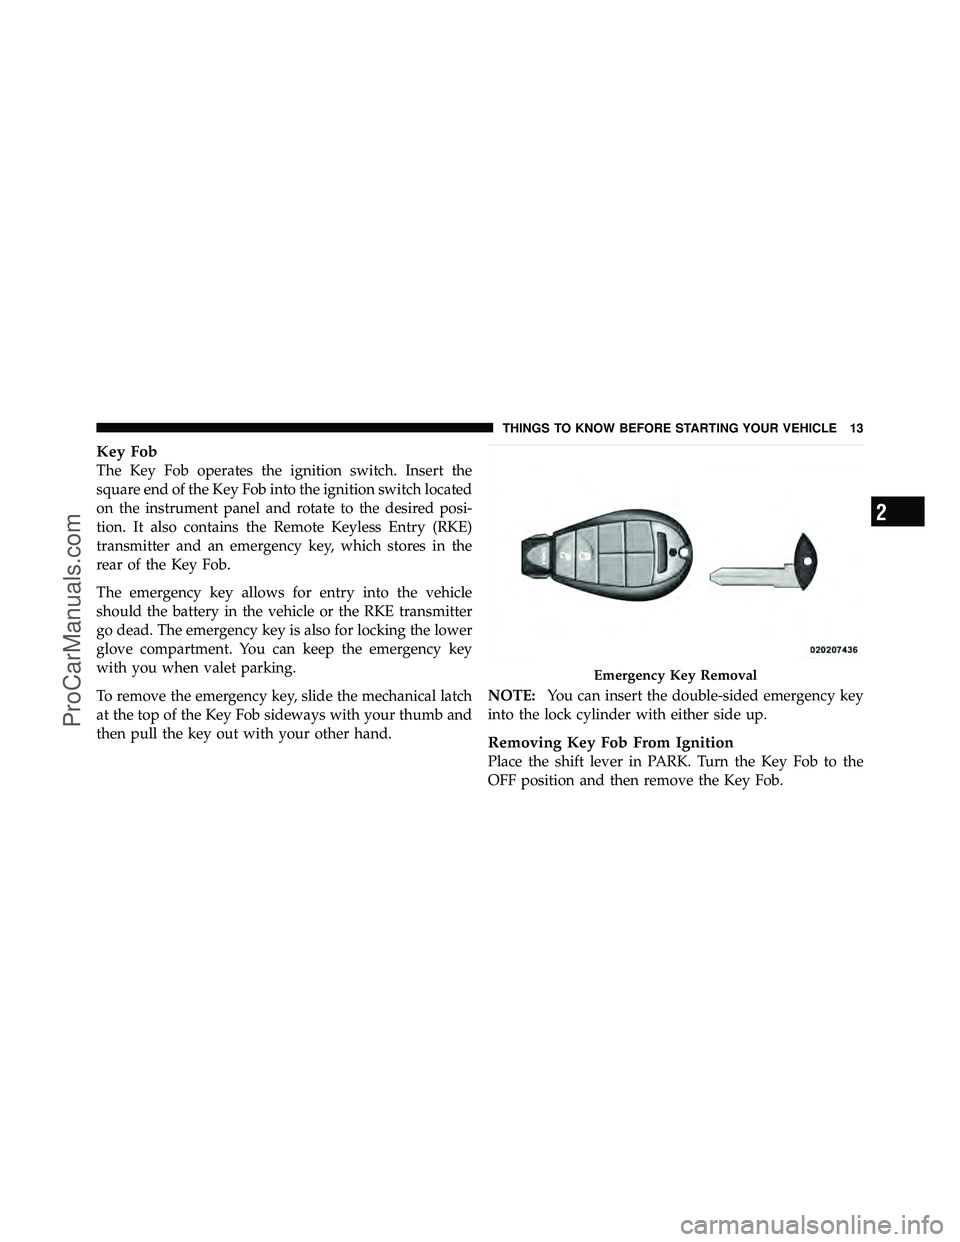 DODGE CARAVAN 2011 User Guide Key Fob
The Key Fob operates the ignition switch. Insert the
square end of the Key Fob into the ignition switch located
on the instrument panel and rotate to the desired posi-
tion. It also contains t